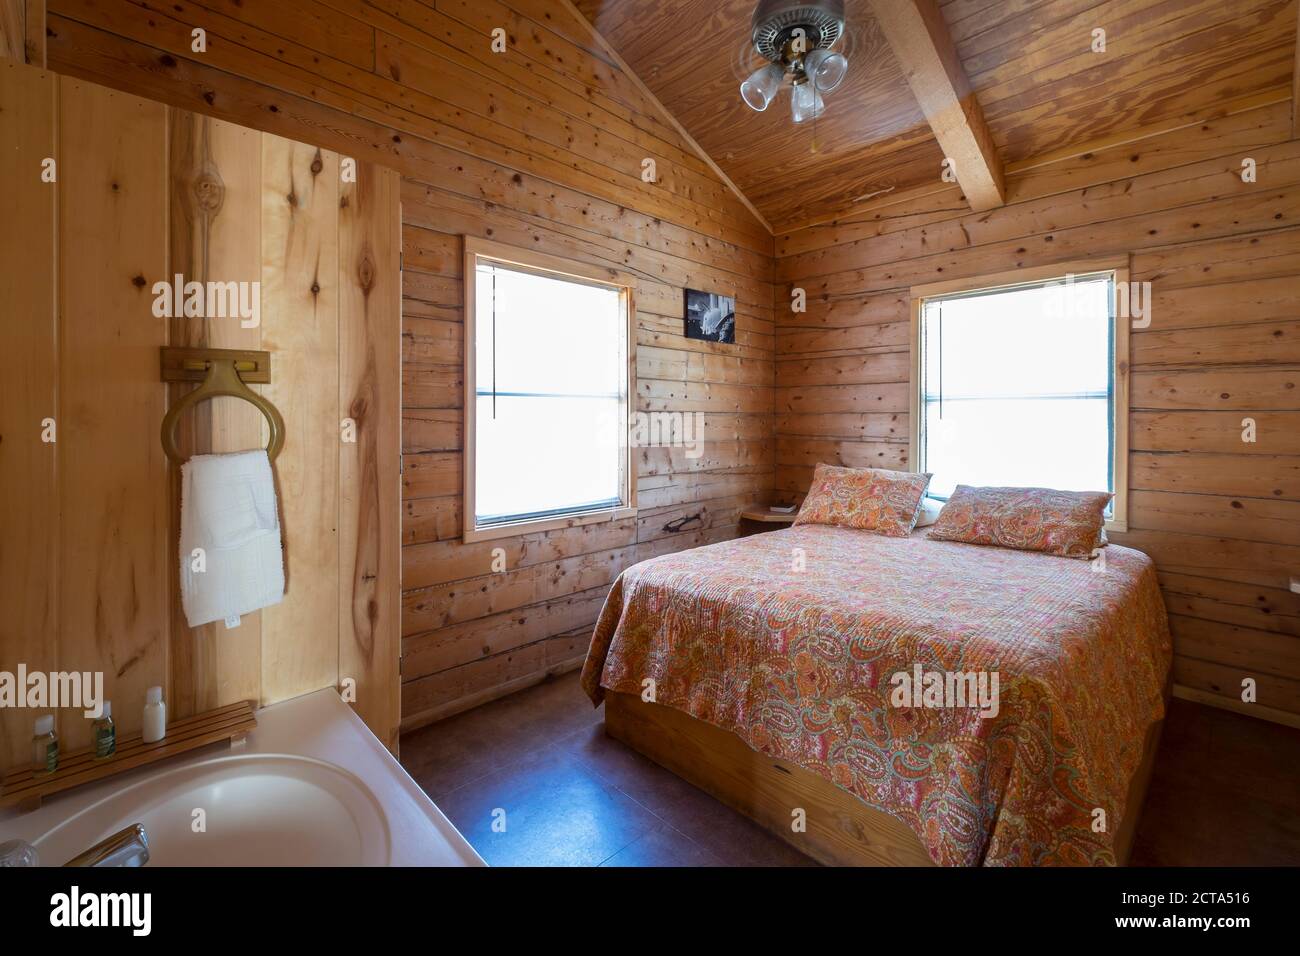 USA, Texas, Bedroom in log home Stock Photo